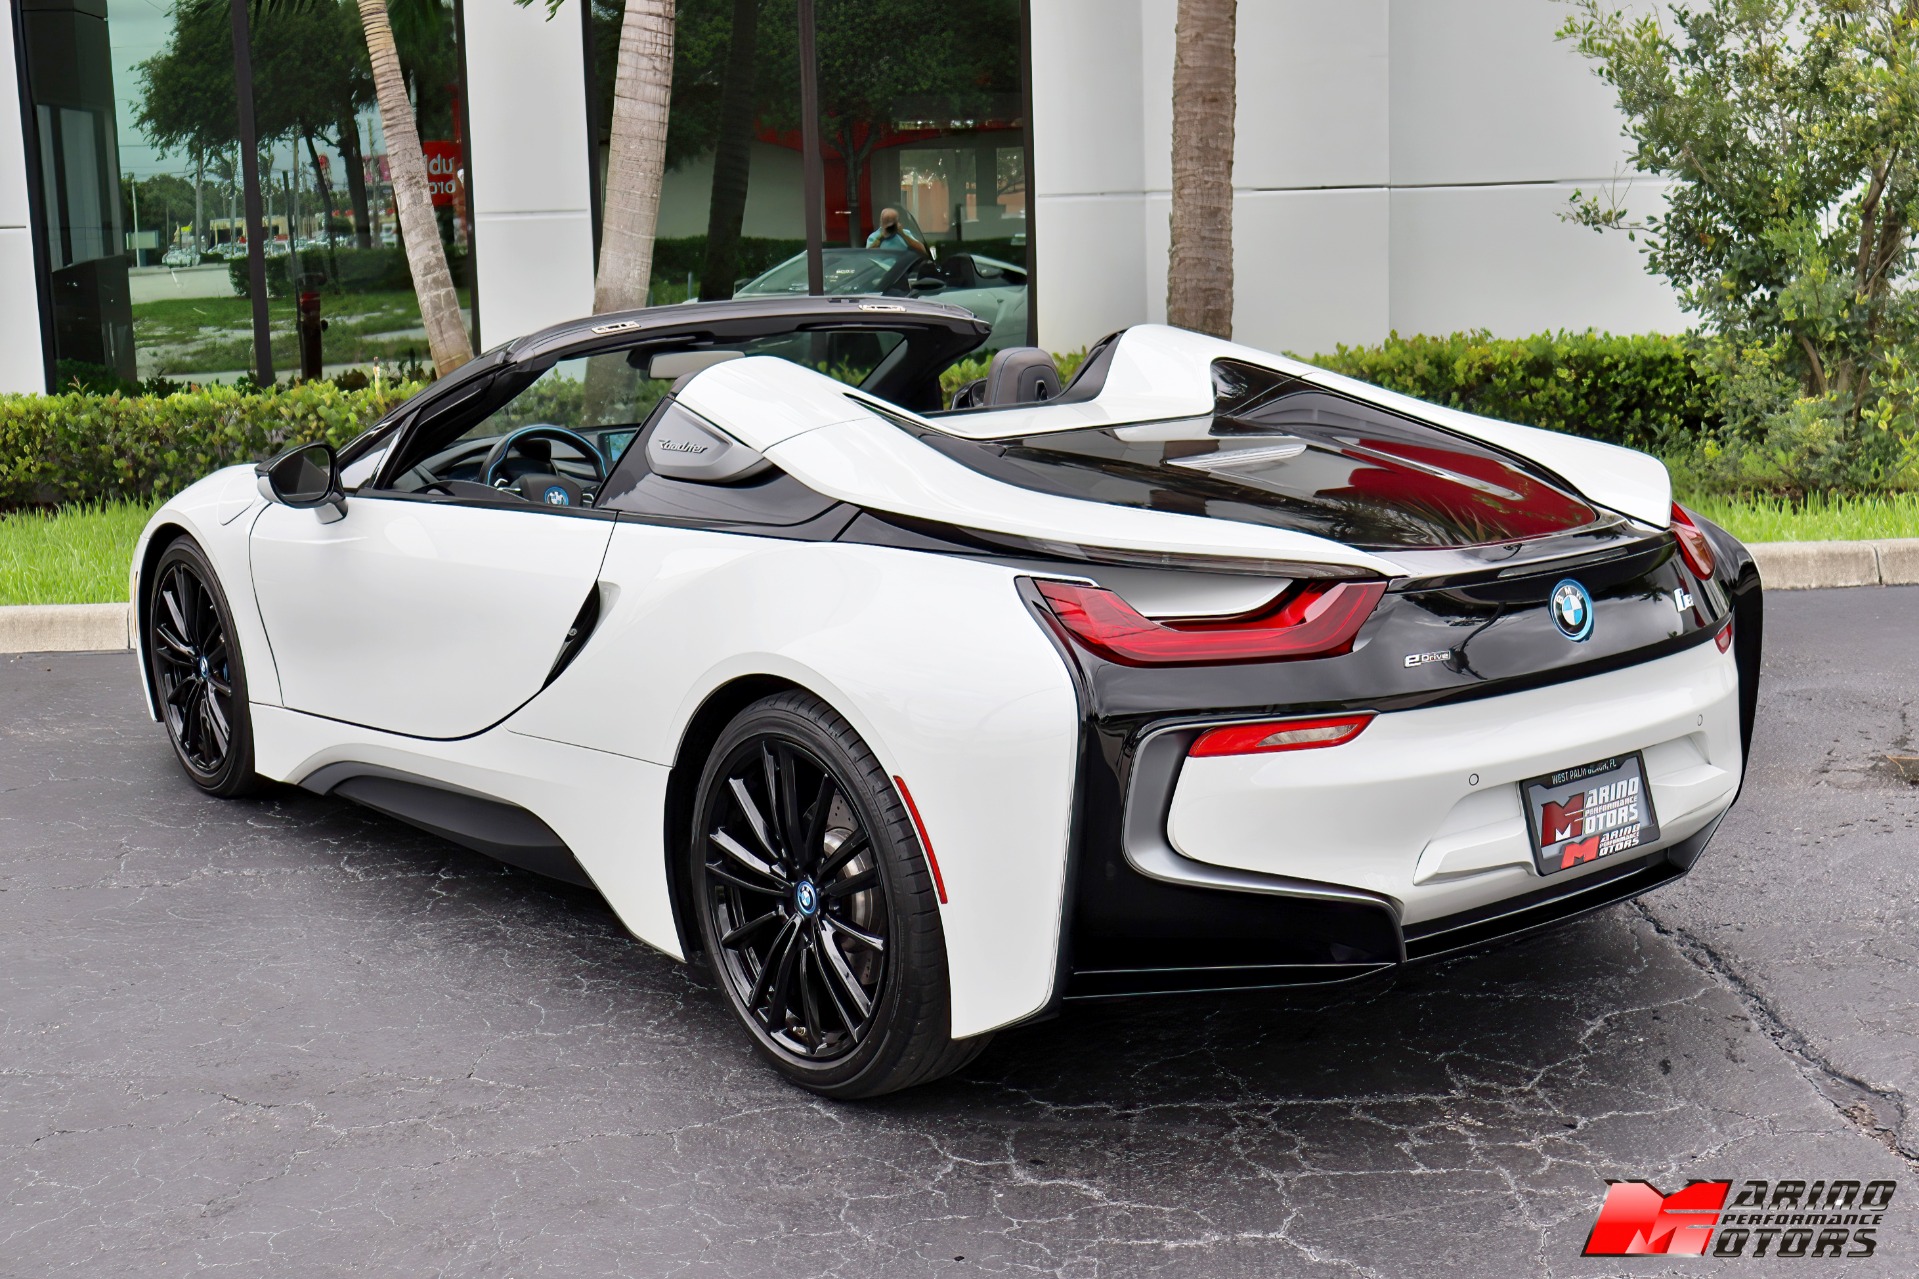 Used 2019 BMW i8 Roadster For Sale | Marino Motors Stock